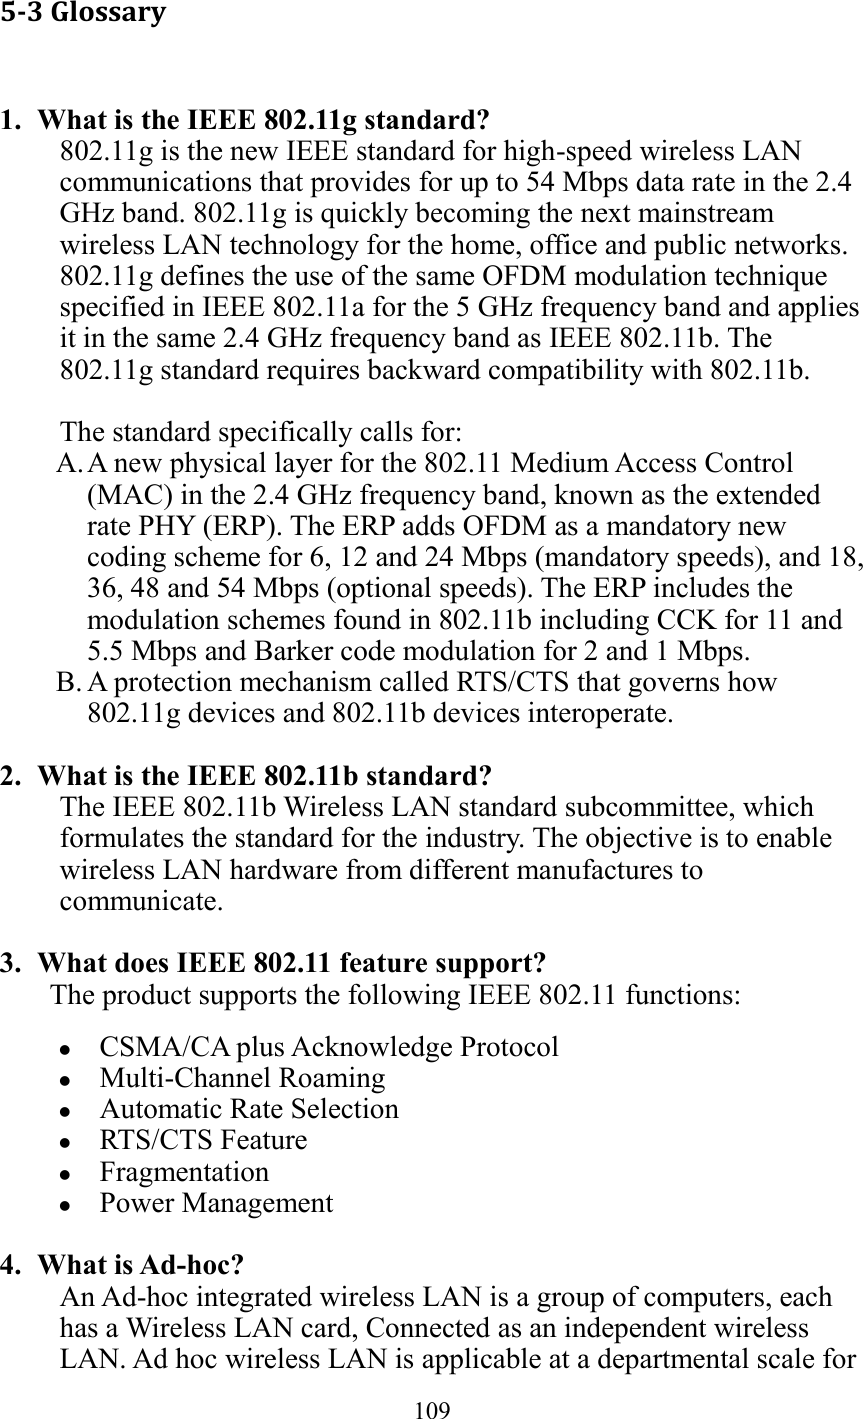  109  5-3 Glossary  1. What is the IEEE 802.11g standard? 802.11g is the new IEEE standard for high-speed wireless LAN communications that provides for up to 54 Mbps data rate in the 2.4 GHz band. 802.11g is quickly becoming the next mainstream wireless LAN technology for the home, office and public networks.   802.11g defines the use of the same OFDM modulation technique specified in IEEE 802.11a for the 5 GHz frequency band and applies it in the same 2.4 GHz frequency band as IEEE 802.11b. The 802.11g standard requires backward compatibility with 802.11b.  The standard specifically calls for:   A. A new physical layer for the 802.11 Medium Access Control (MAC) in the 2.4 GHz frequency band, known as the extended rate PHY (ERP). The ERP adds OFDM as a mandatory new coding scheme for 6, 12 and 24 Mbps (mandatory speeds), and 18, 36, 48 and 54 Mbps (optional speeds). The ERP includes the modulation schemes found in 802.11b including CCK for 11 and 5.5 Mbps and Barker code modulation for 2 and 1 Mbps. B. A protection mechanism called RTS/CTS that governs how 802.11g devices and 802.11b devices interoperate.  2. What is the IEEE 802.11b standard? The IEEE 802.11b Wireless LAN standard subcommittee, which formulates the standard for the industry. The objective is to enable wireless LAN hardware from different manufactures to communicate.  3. What does IEEE 802.11 feature support? The product supports the following IEEE 802.11 functions:  CSMA/CA plus Acknowledge Protocol  Multi-Channel Roaming  Automatic Rate Selection  RTS/CTS Feature  Fragmentation  Power Management  4. What is Ad-hoc? An Ad-hoc integrated wireless LAN is a group of computers, each has a Wireless LAN card, Connected as an independent wireless LAN. Ad hoc wireless LAN is applicable at a departmental scale for 